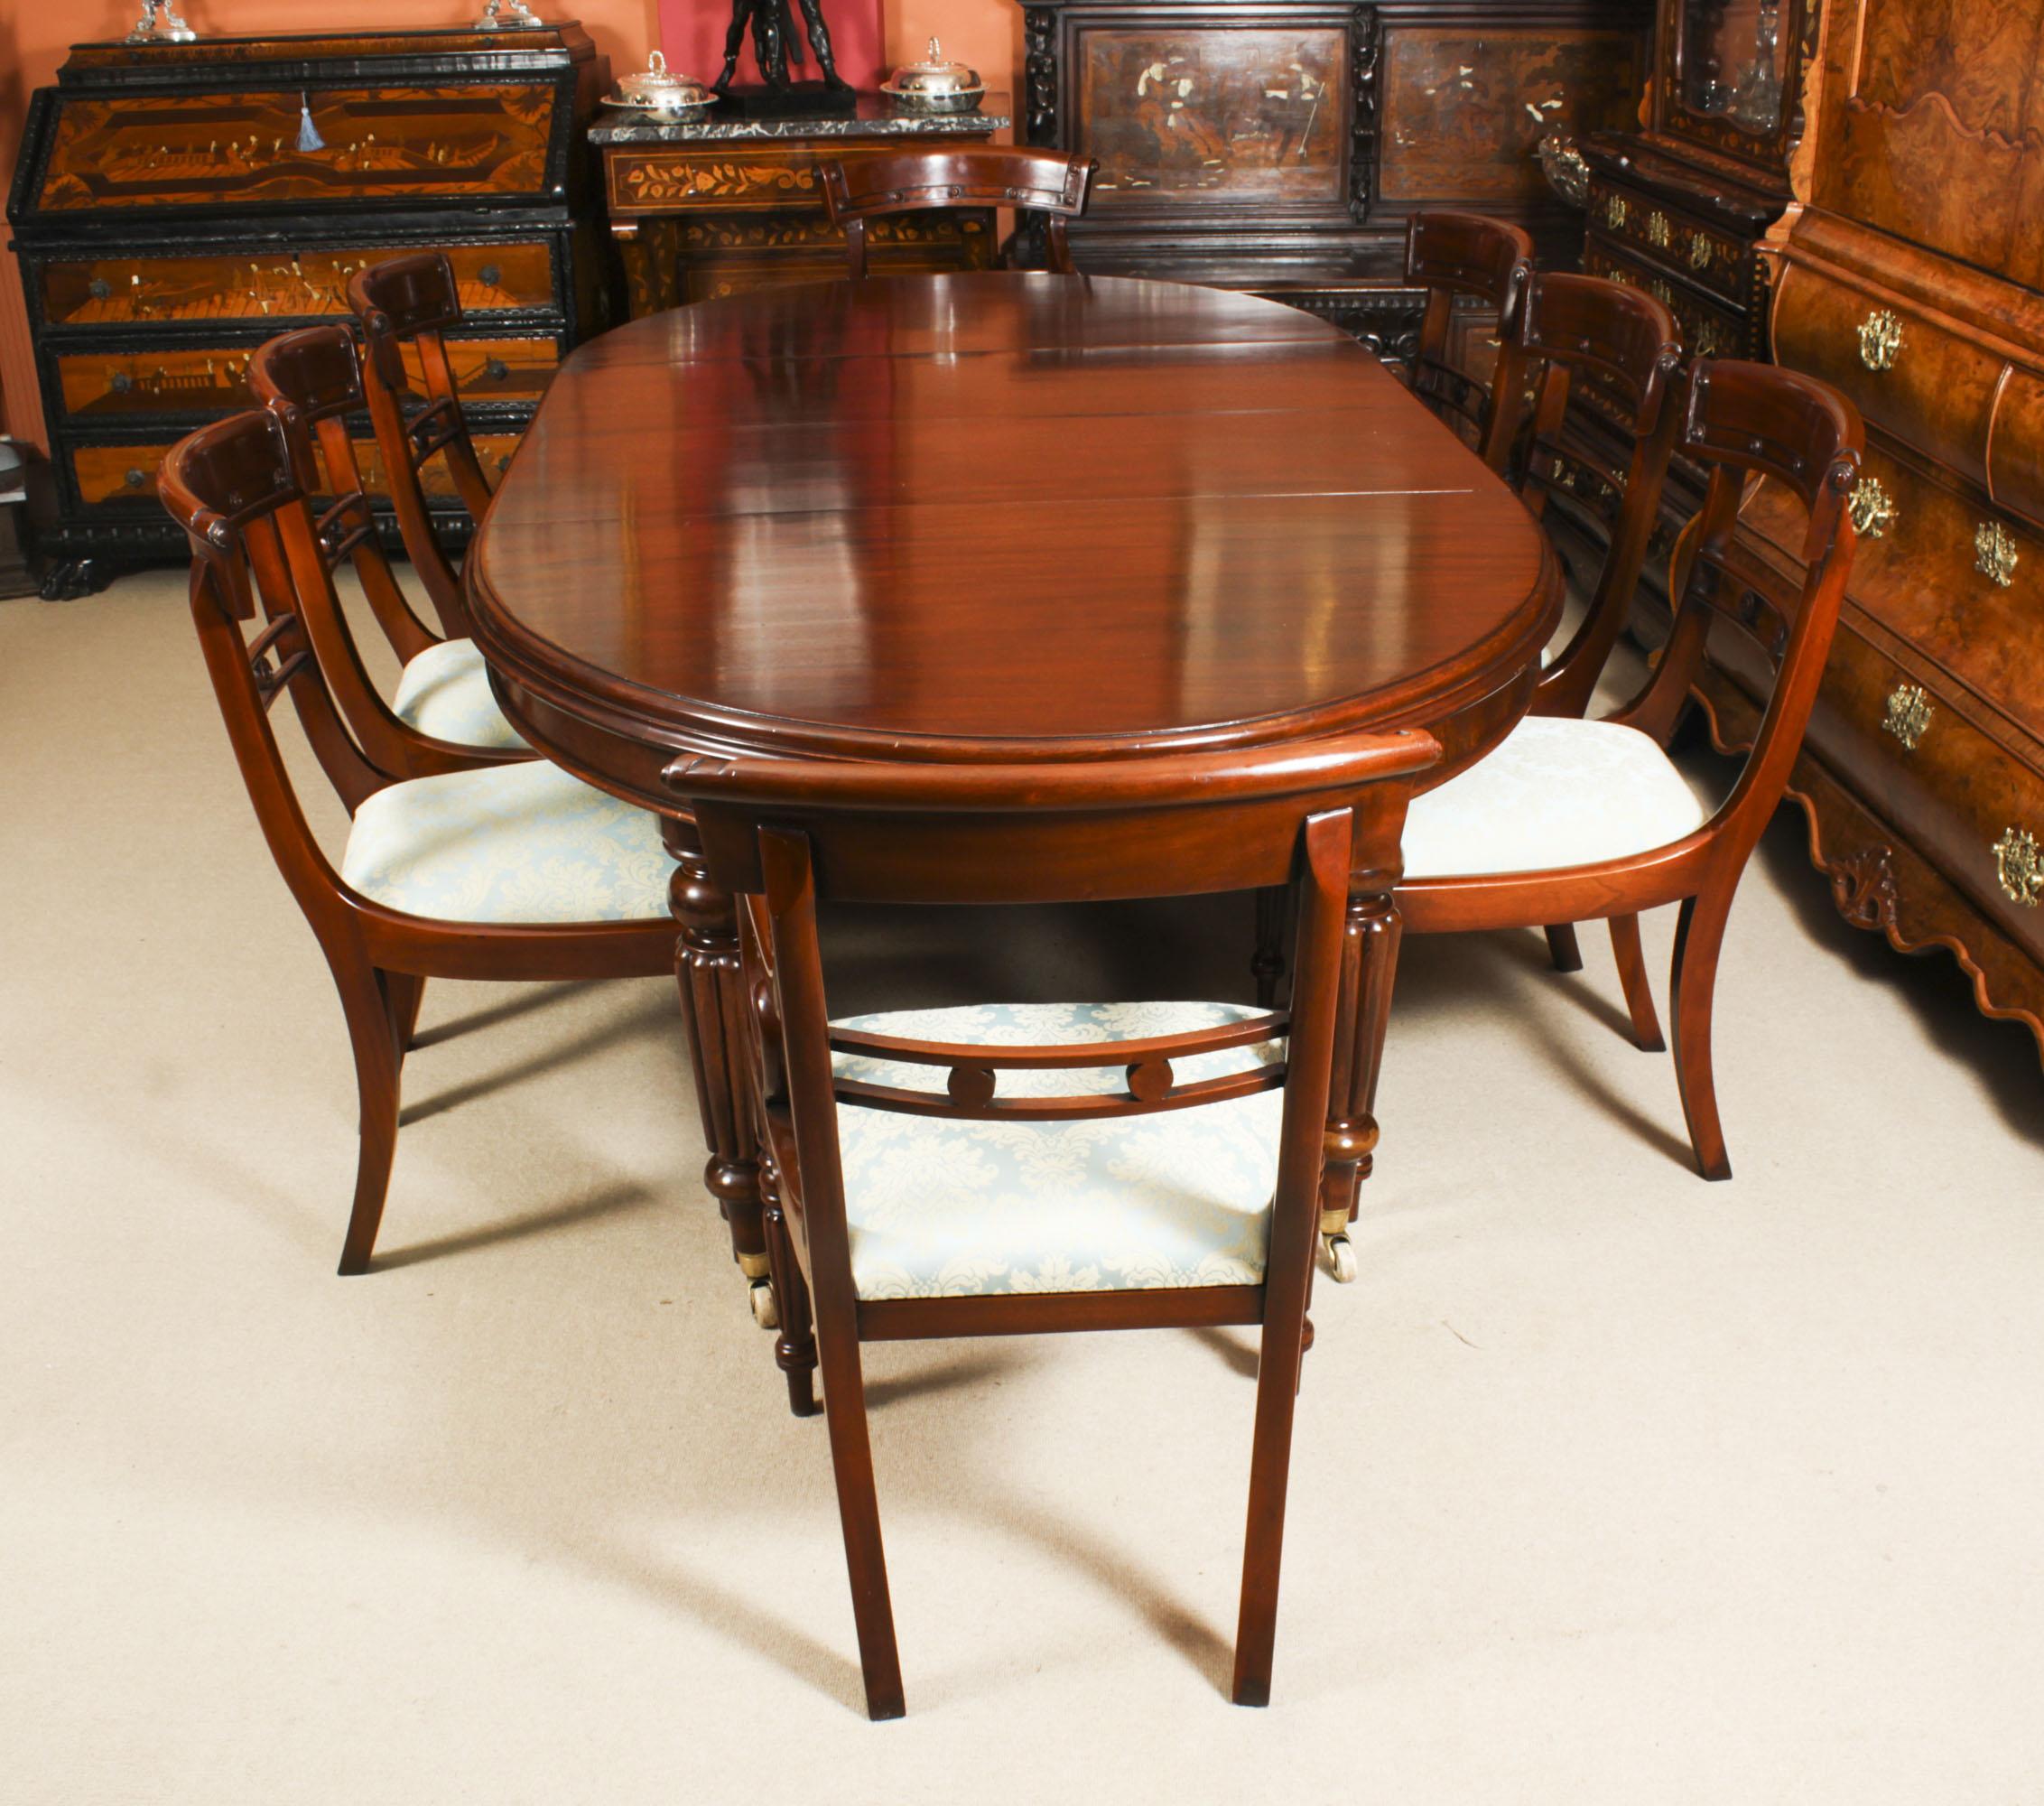 This is a fabulous antique Victorian oval mahogany extending dining table, circa 1860 in date and eight Regency Revival dining chairs. 

The table has two original leaves and can comfortably seat eight. It has been hand-crafted from solid mahogany